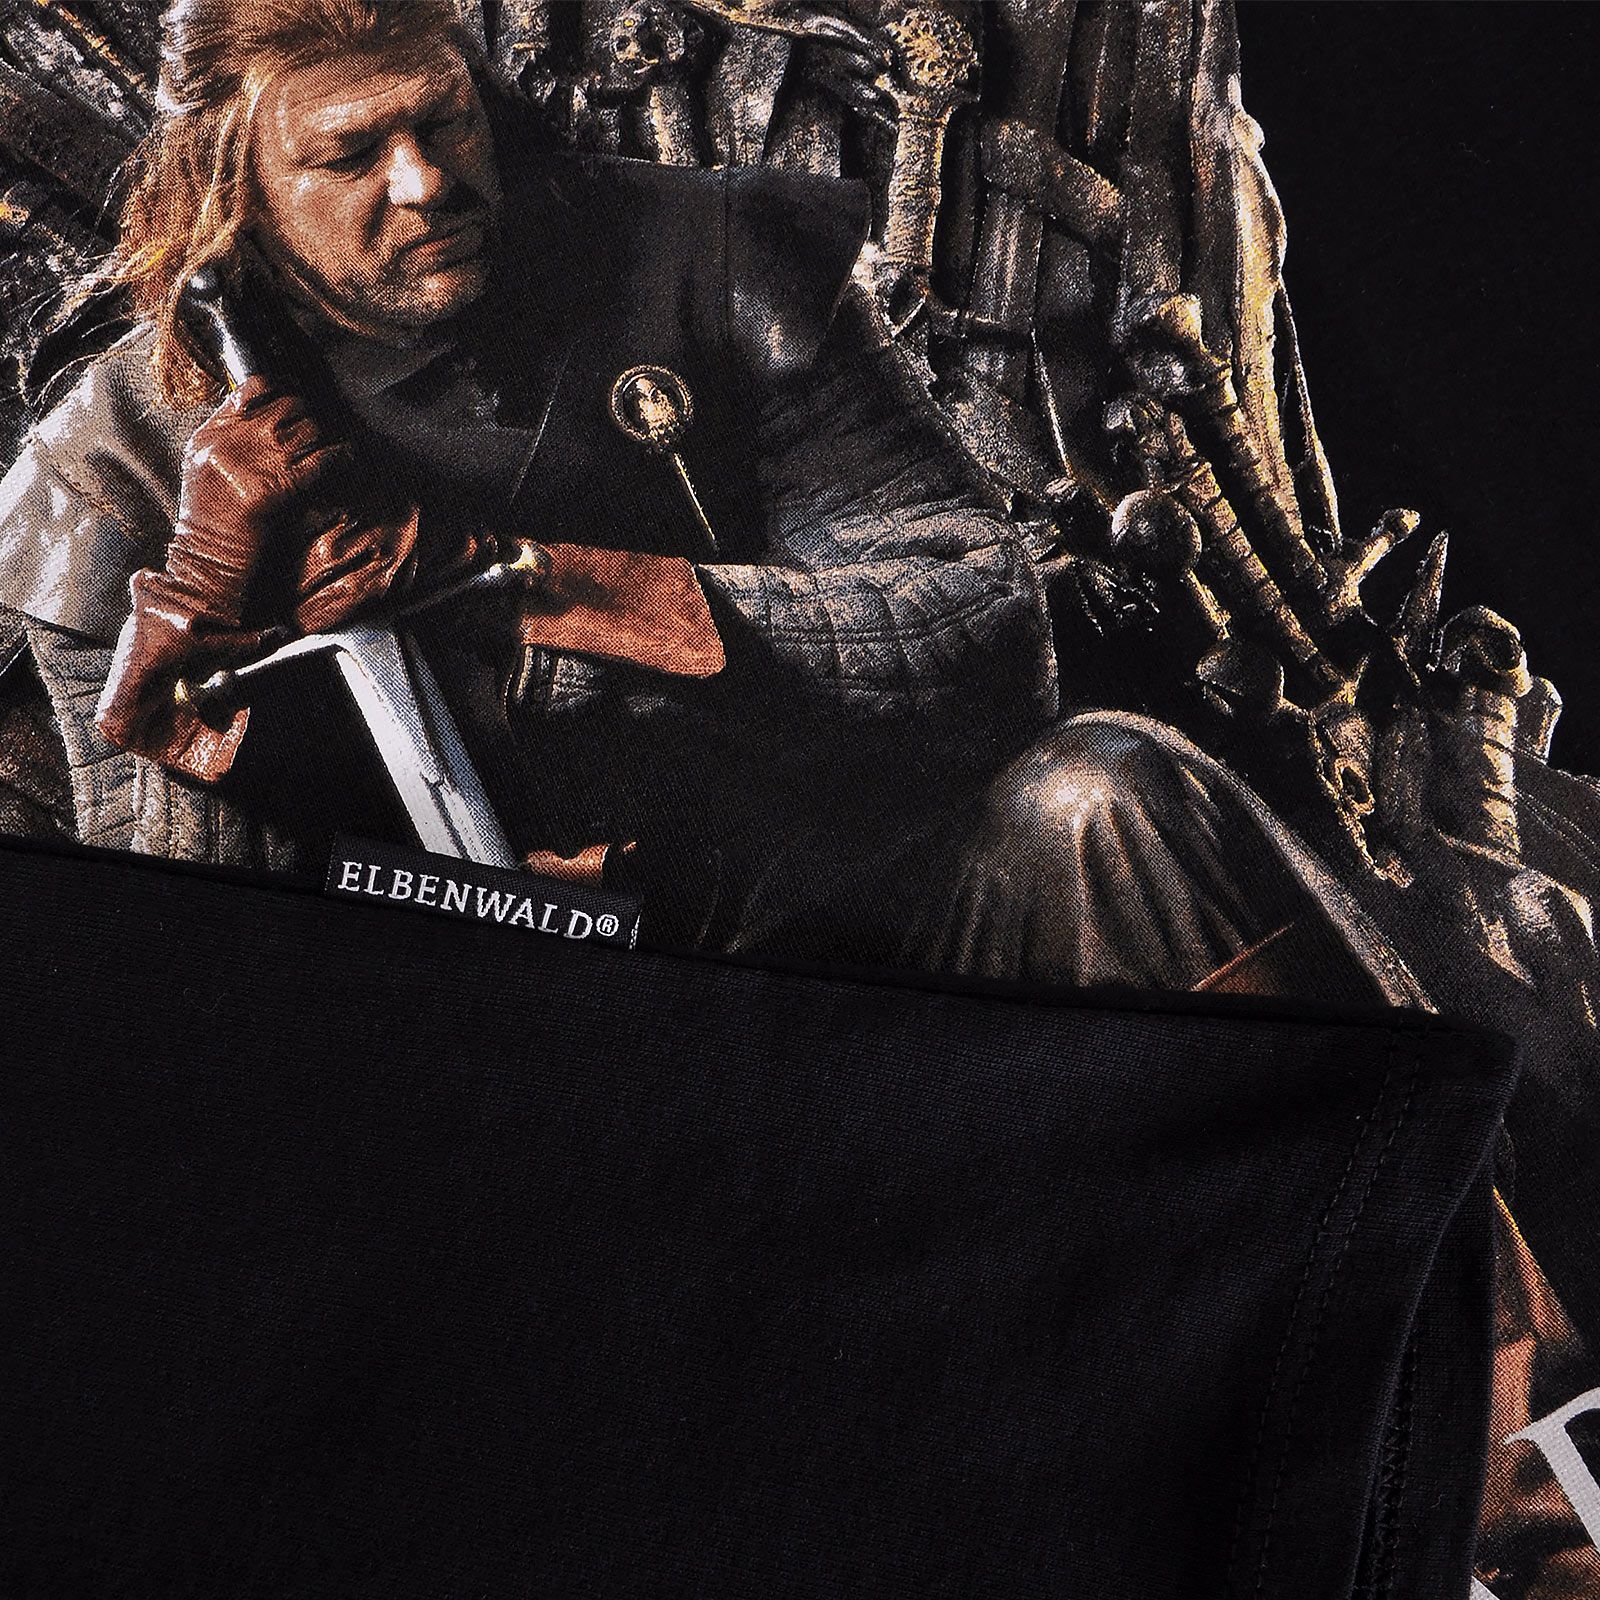 Ned Stark Lord of Winterfell T-Shirt - Game of Thrones